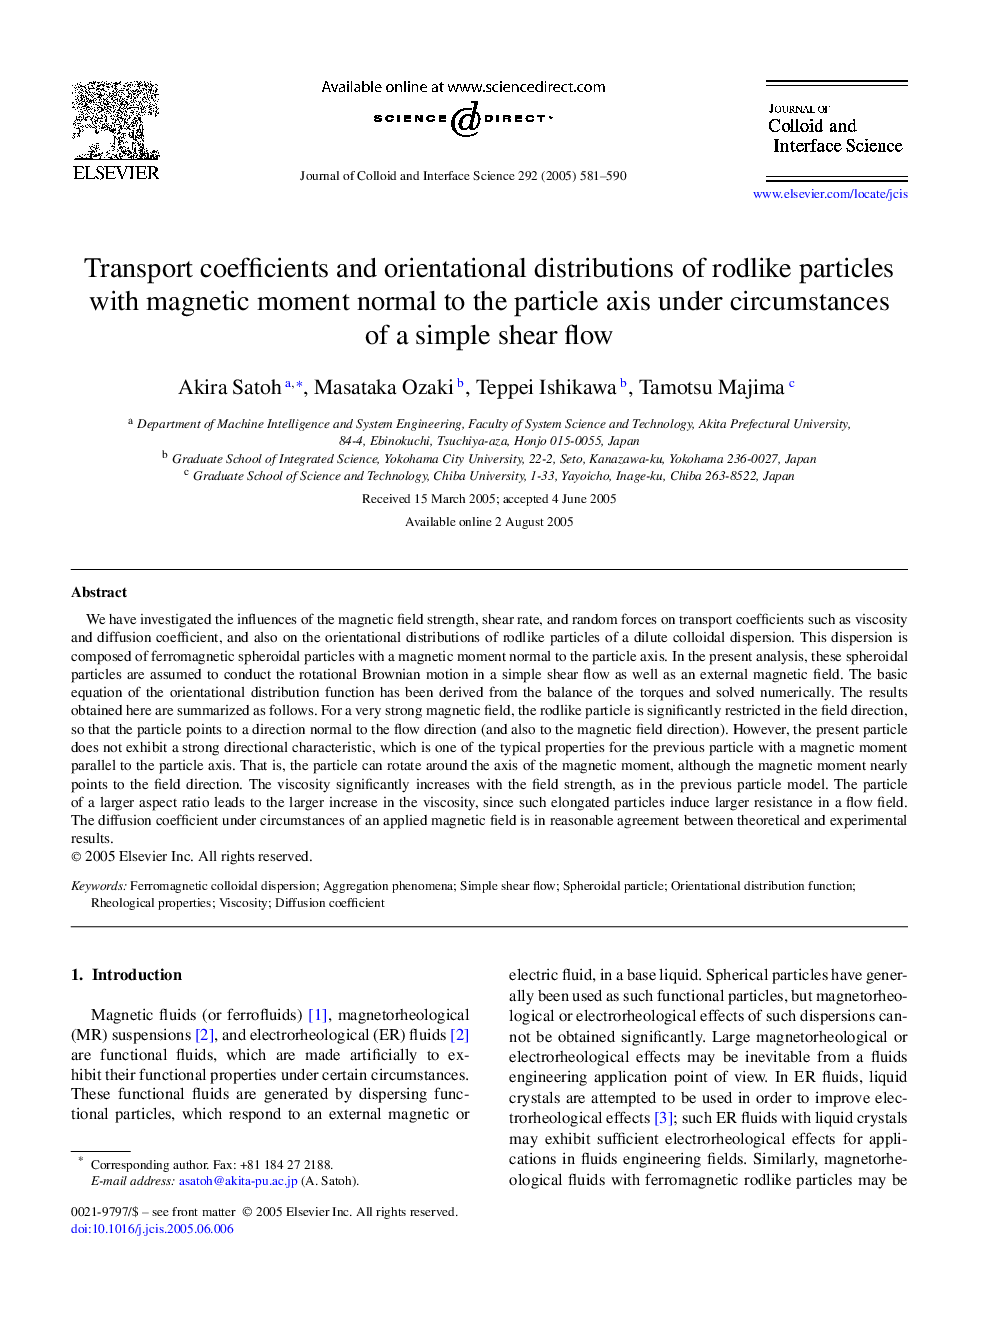 Transport coefficients and orientational distributions of rodlike particles with magnetic moment normal to the particle axis under circumstances of a simple shear flow